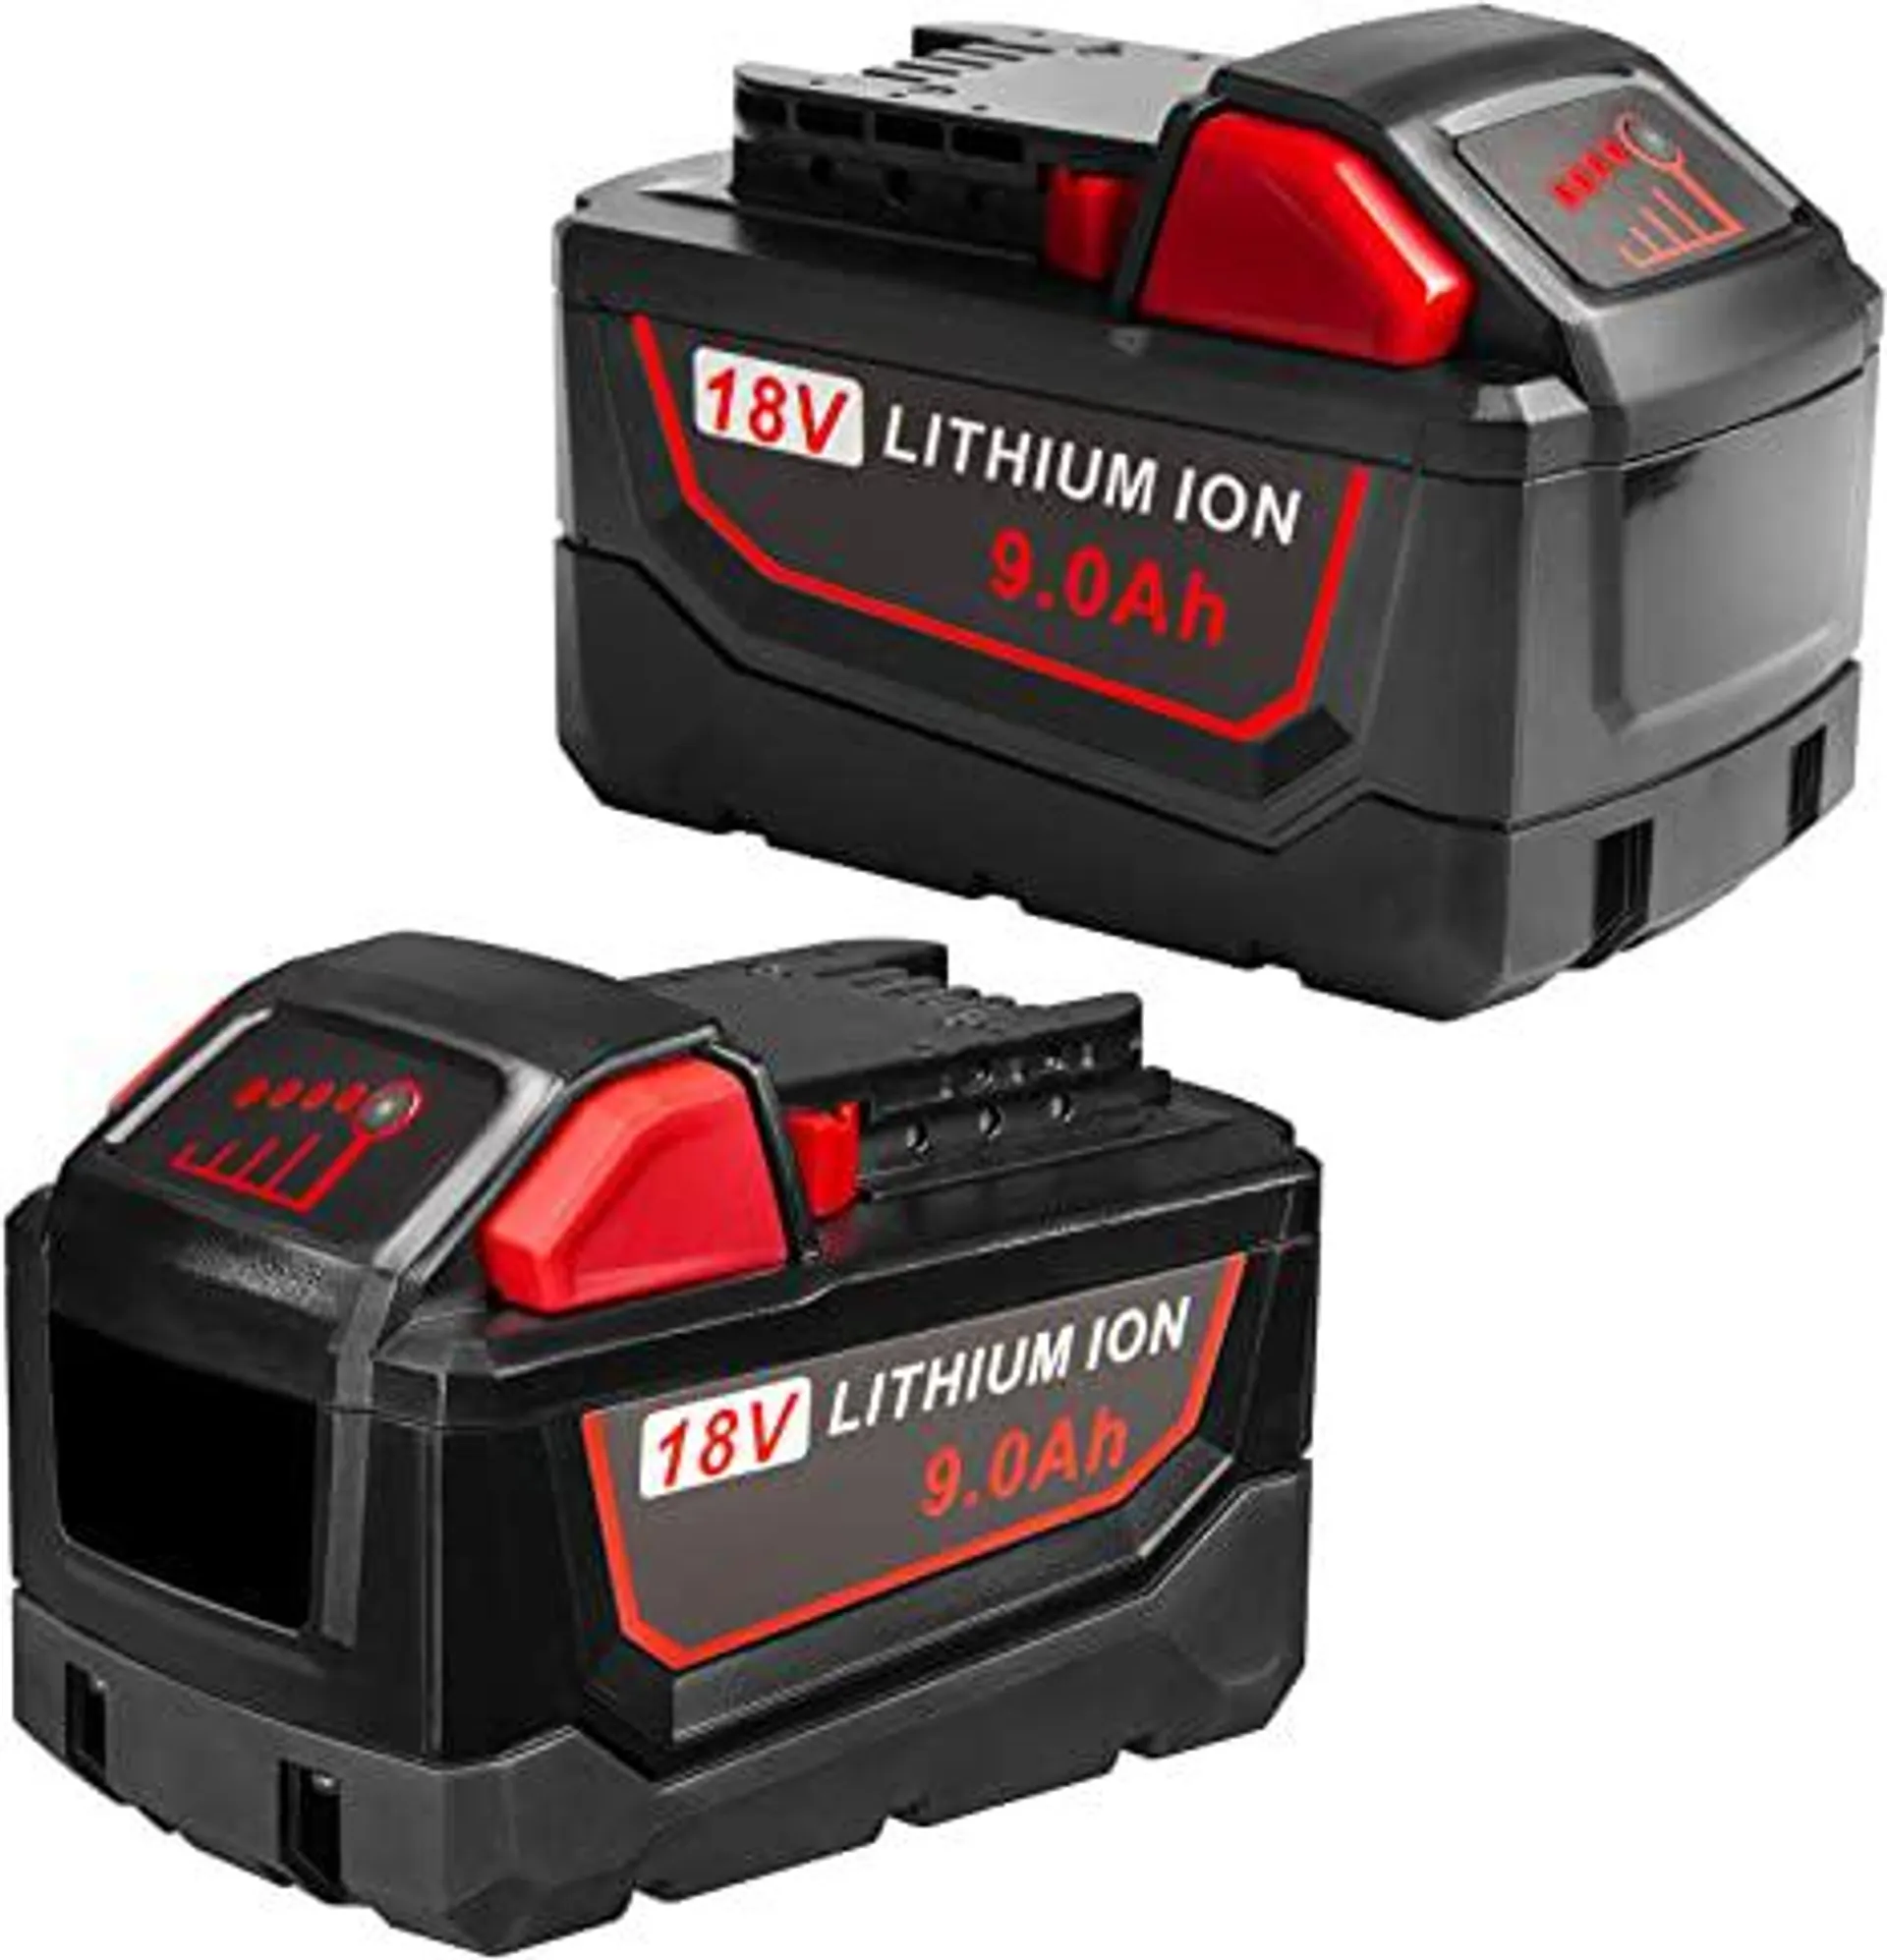 [2Pack] 9000mAh New Upgraded M18 Replacement Battery Compatible with Milwaukee M-18/M-18B/48-11-1812/48-11-1862/48-11-1852/48-11-1828/48-11-1815/48-11-10/48-11-1820/48-11-1840/48-11-1850/48-11-1860